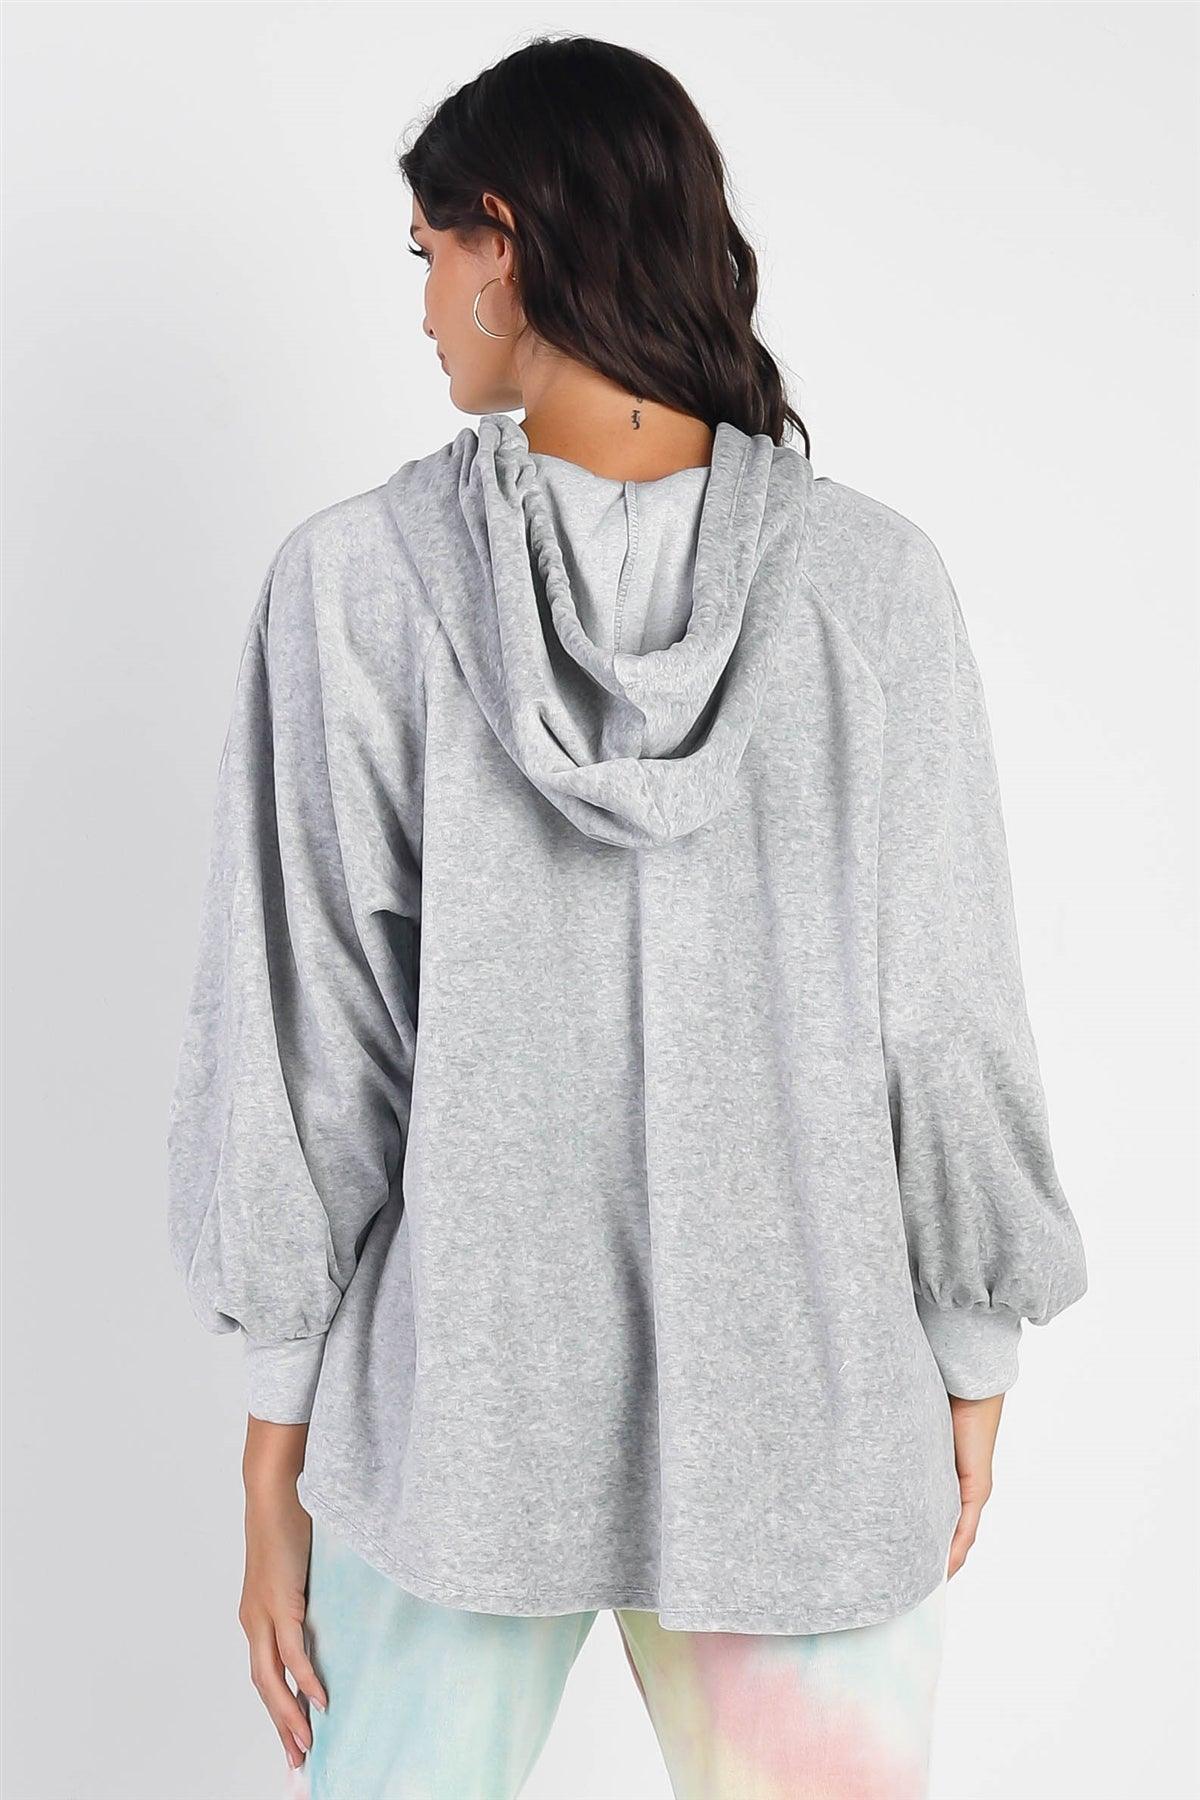 Grey Cotton Blend Hooded Long Sleeve Sweaters /1-1-1